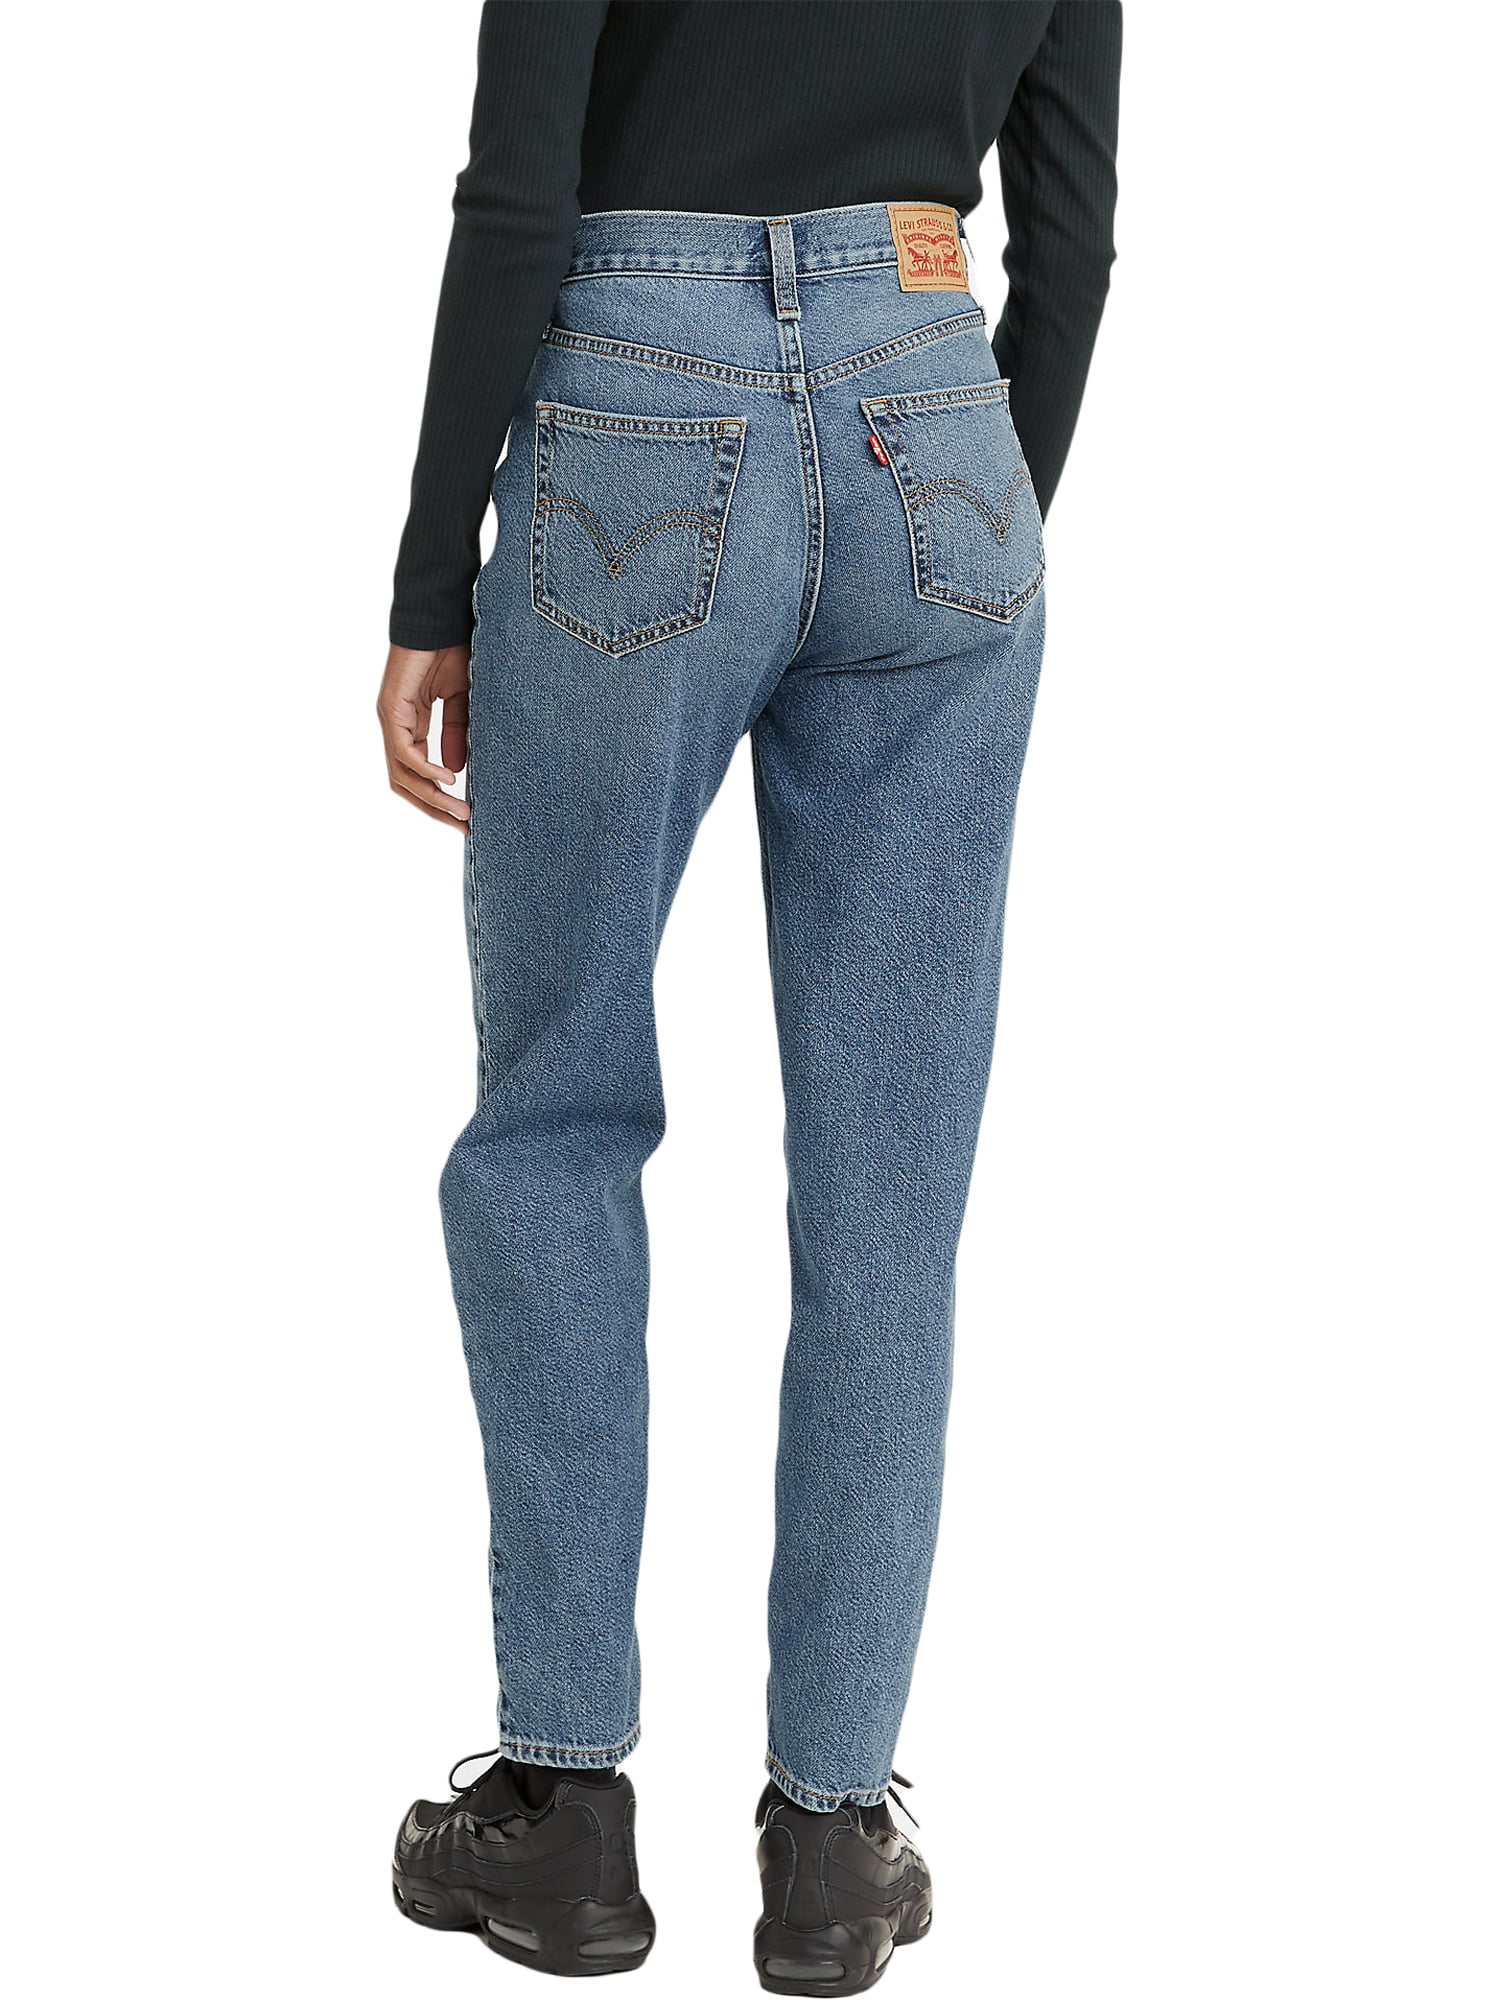 Levi's Original Red Tab Women's High-Waisted Mom Jeans